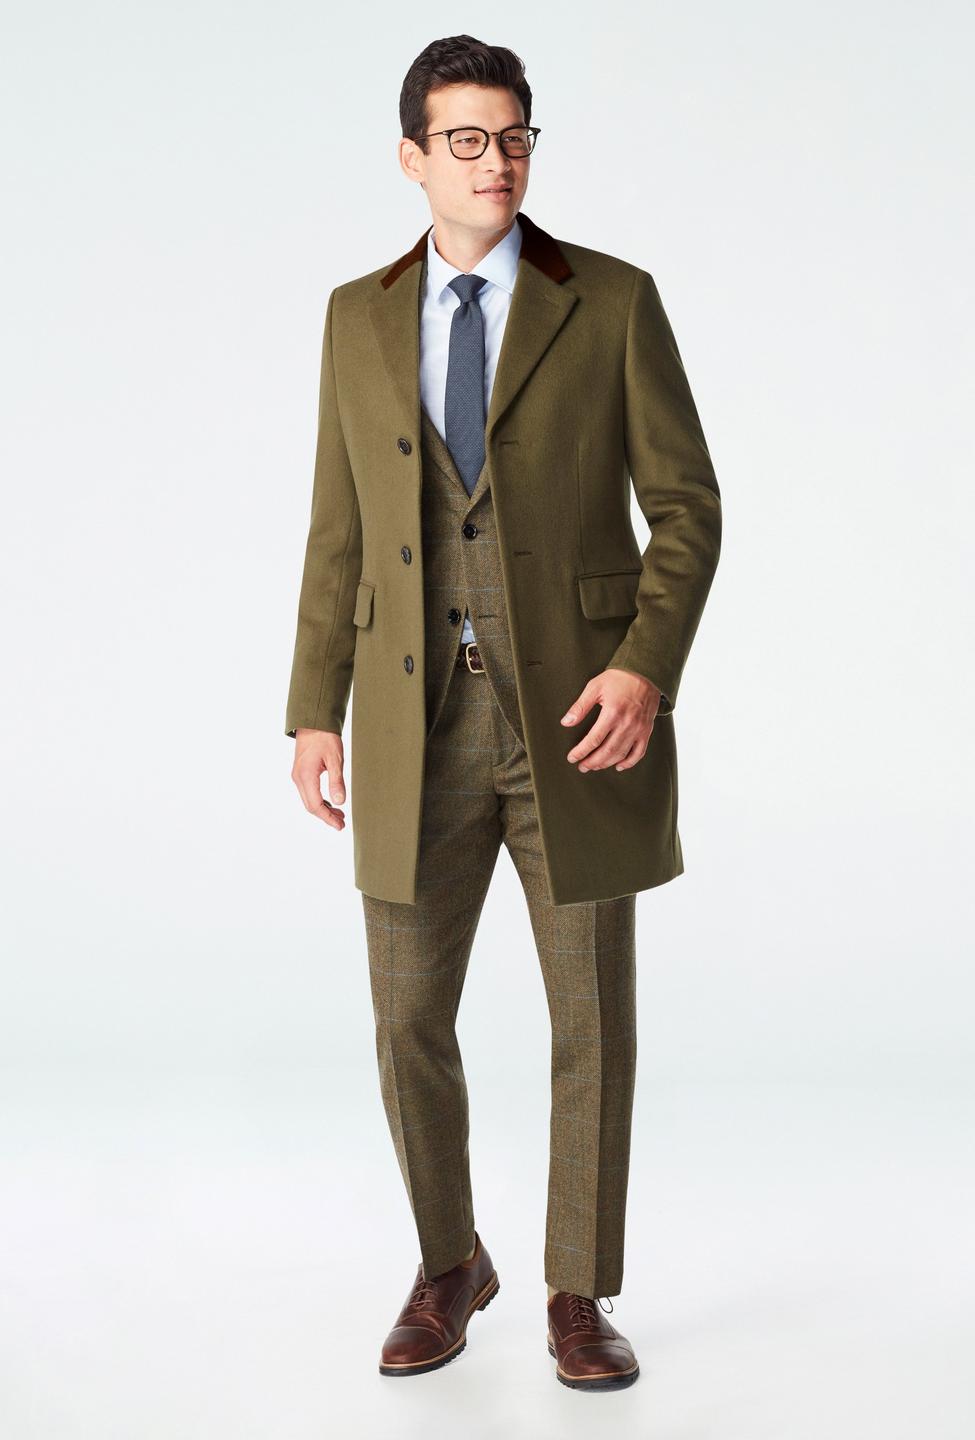 Green outerwear - Huntley Solid Design from Indochino Collection